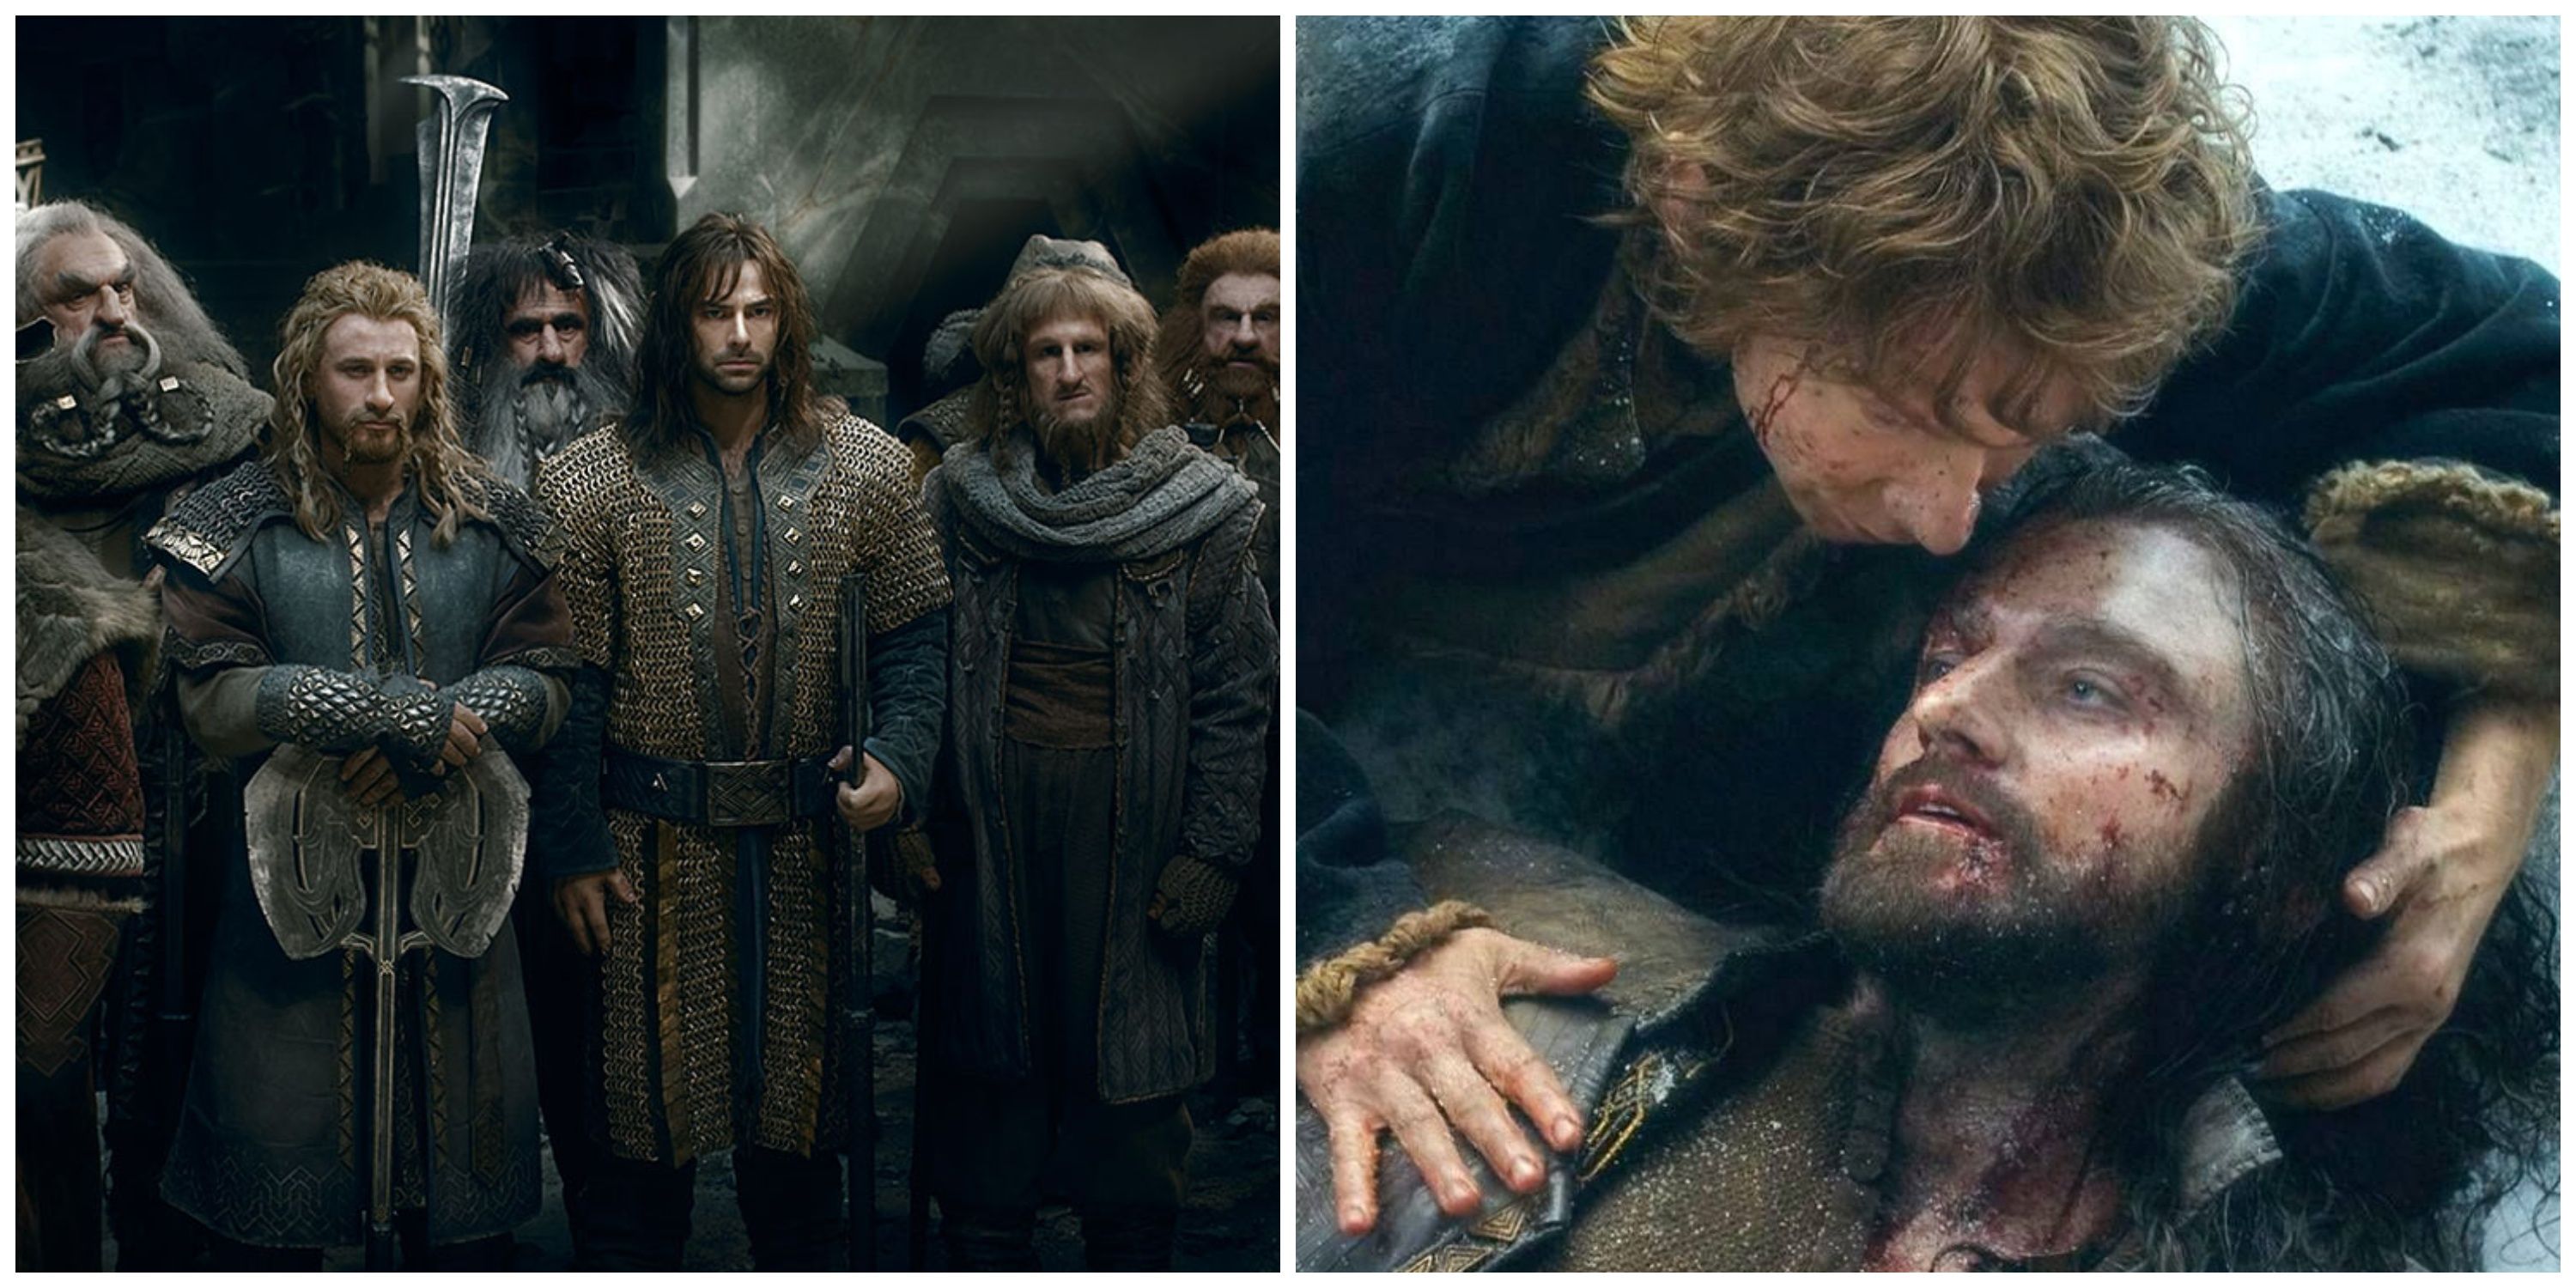 the dwarves of thorin's company and bilbo baggings